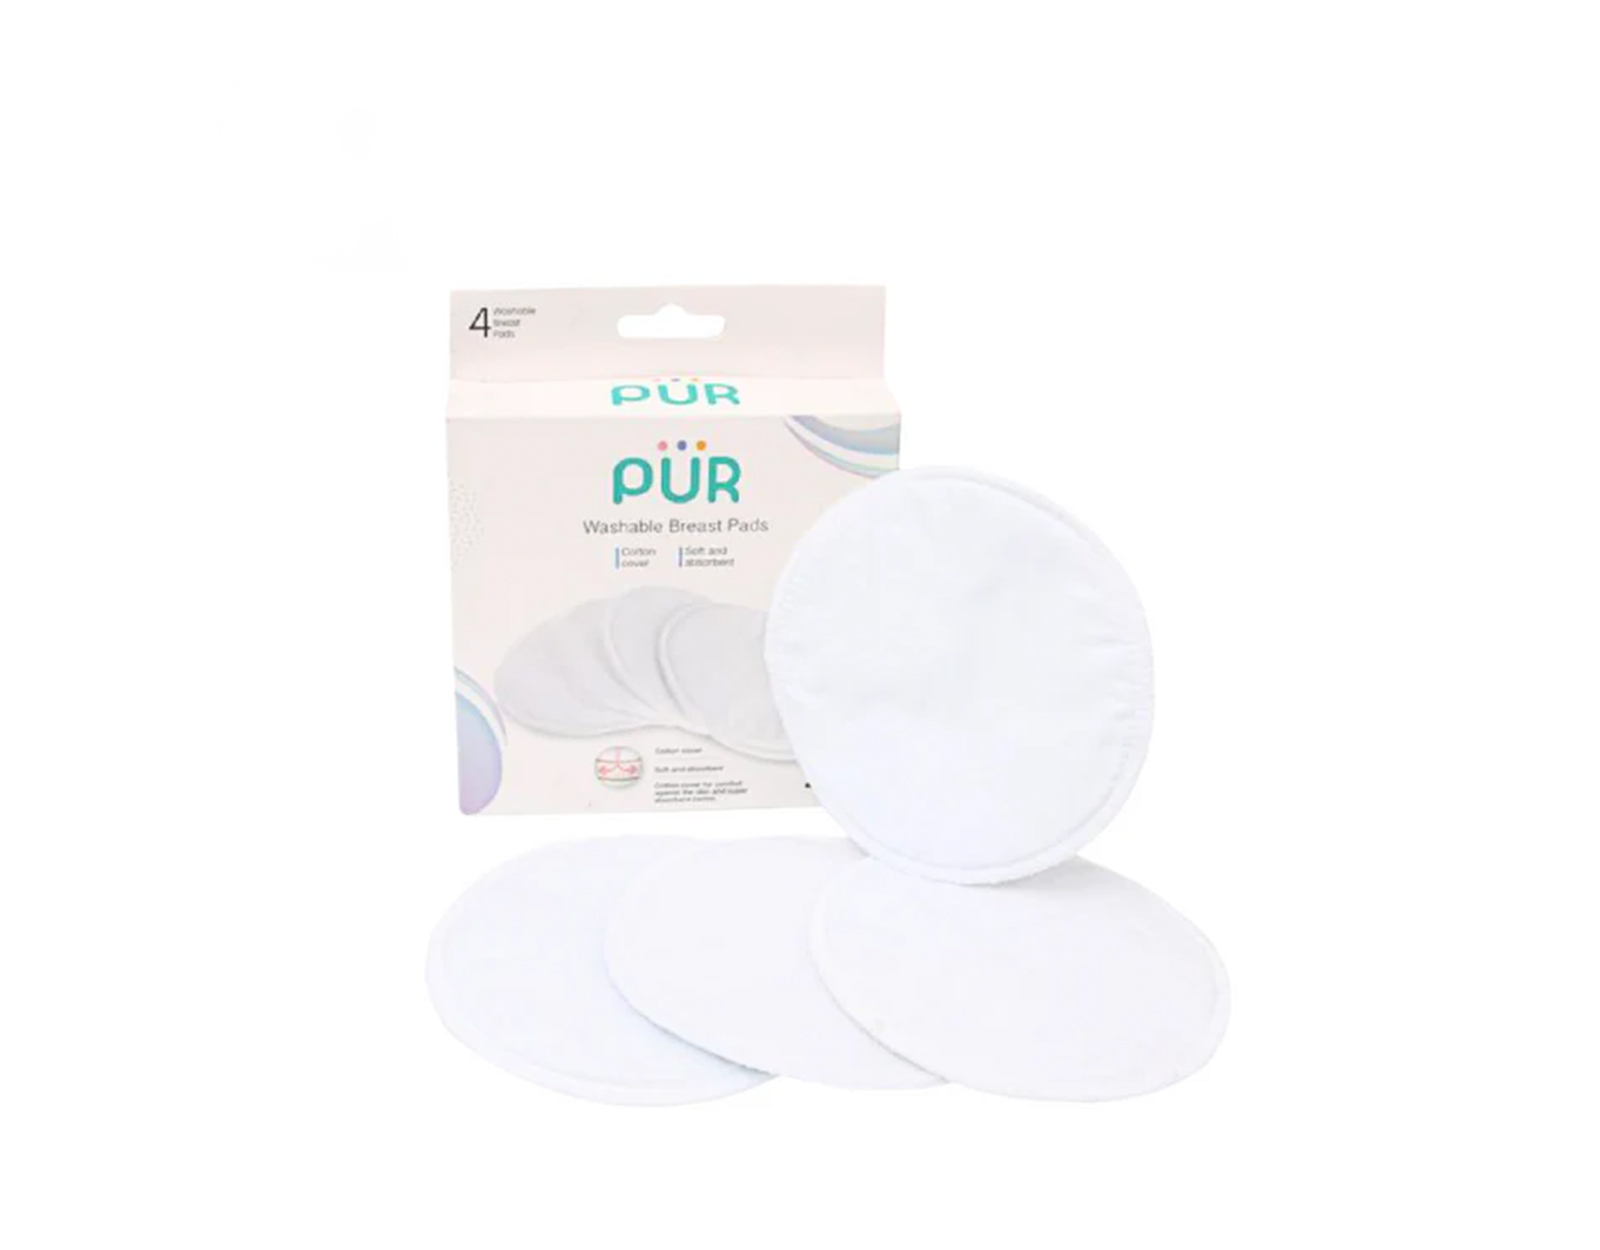 Nursing pads from Pur Baby